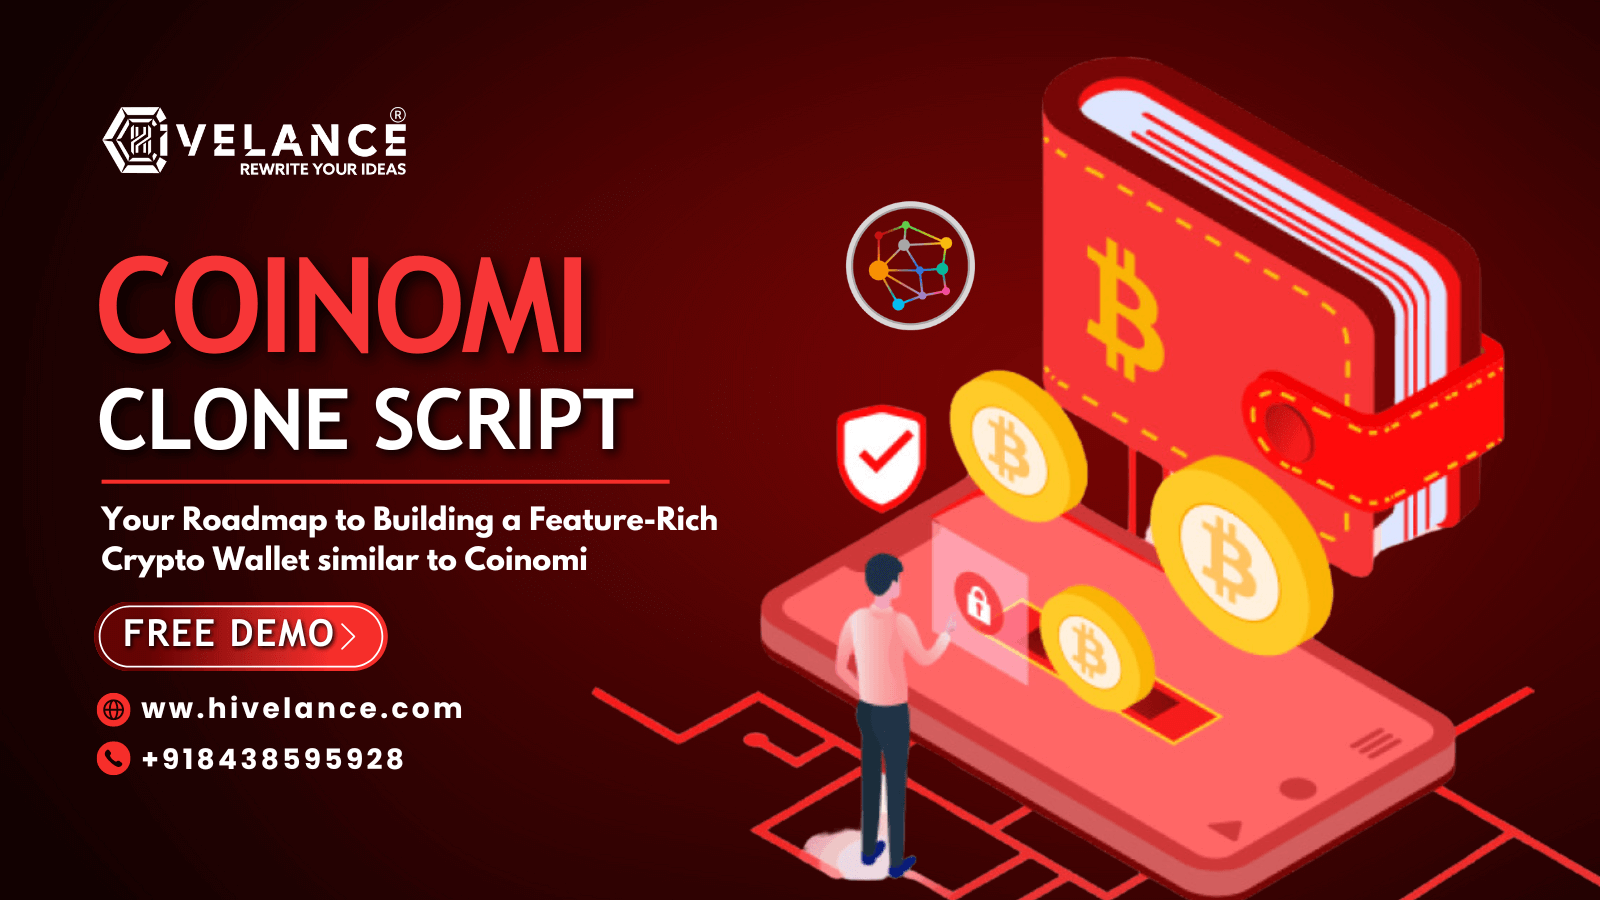 Coinomi clone script - Launch Your Own Crypto Wallet Similar To Coinomi